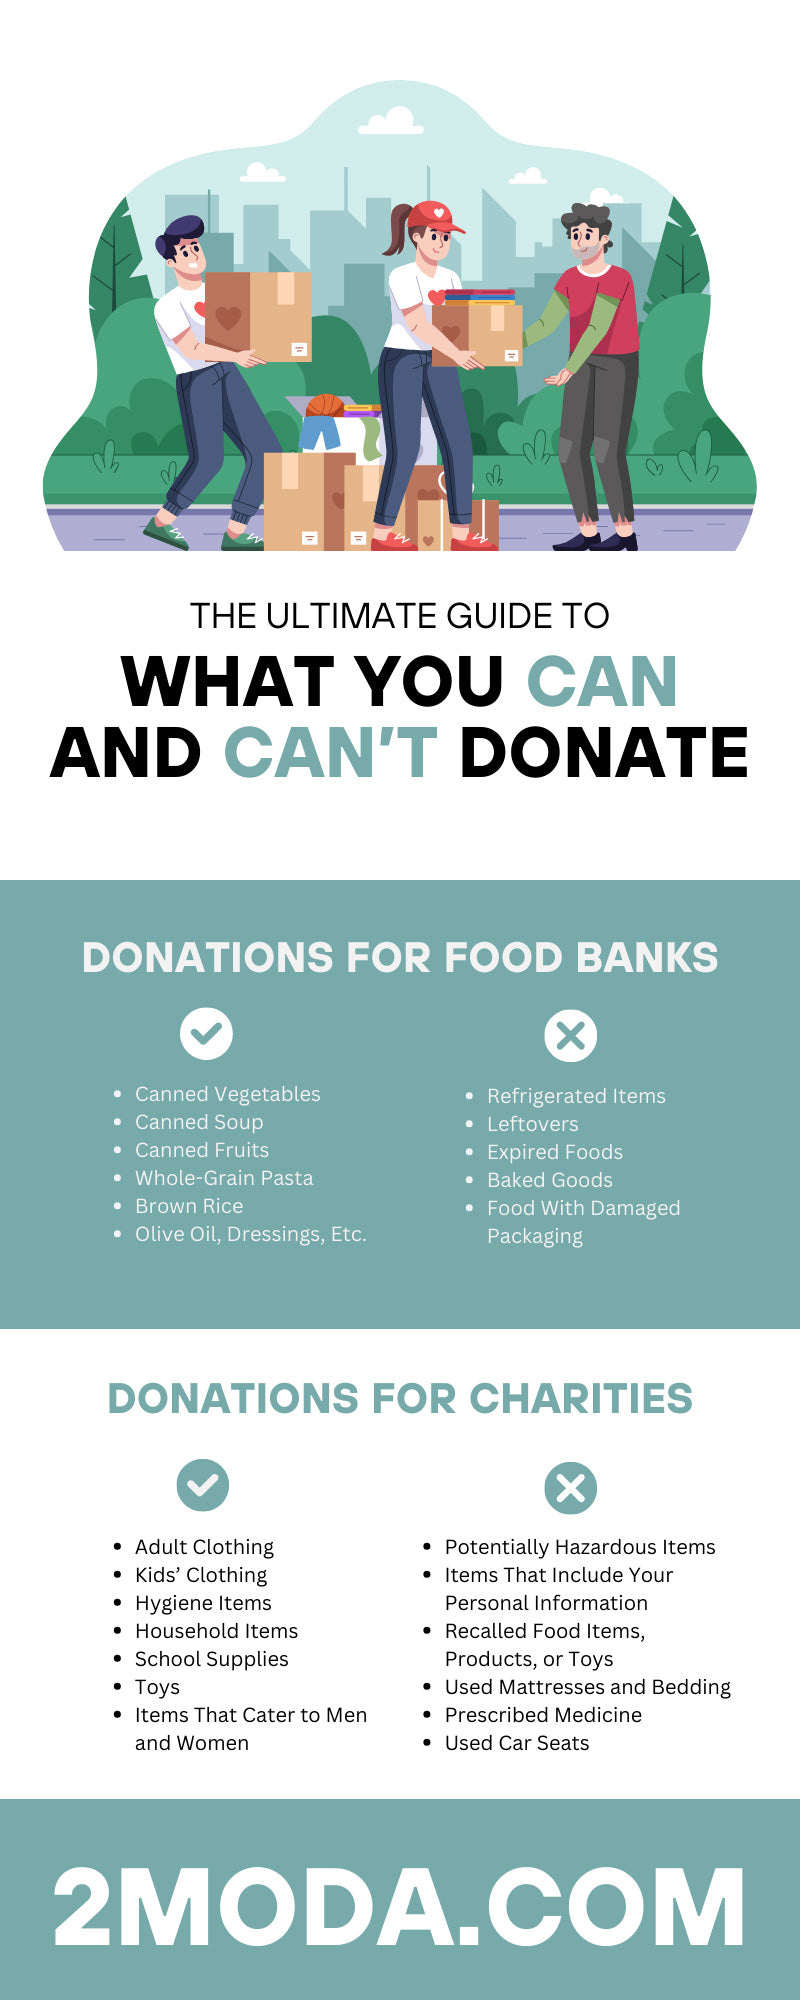 The Ultimate Guide to What You Can and Can’t Donate